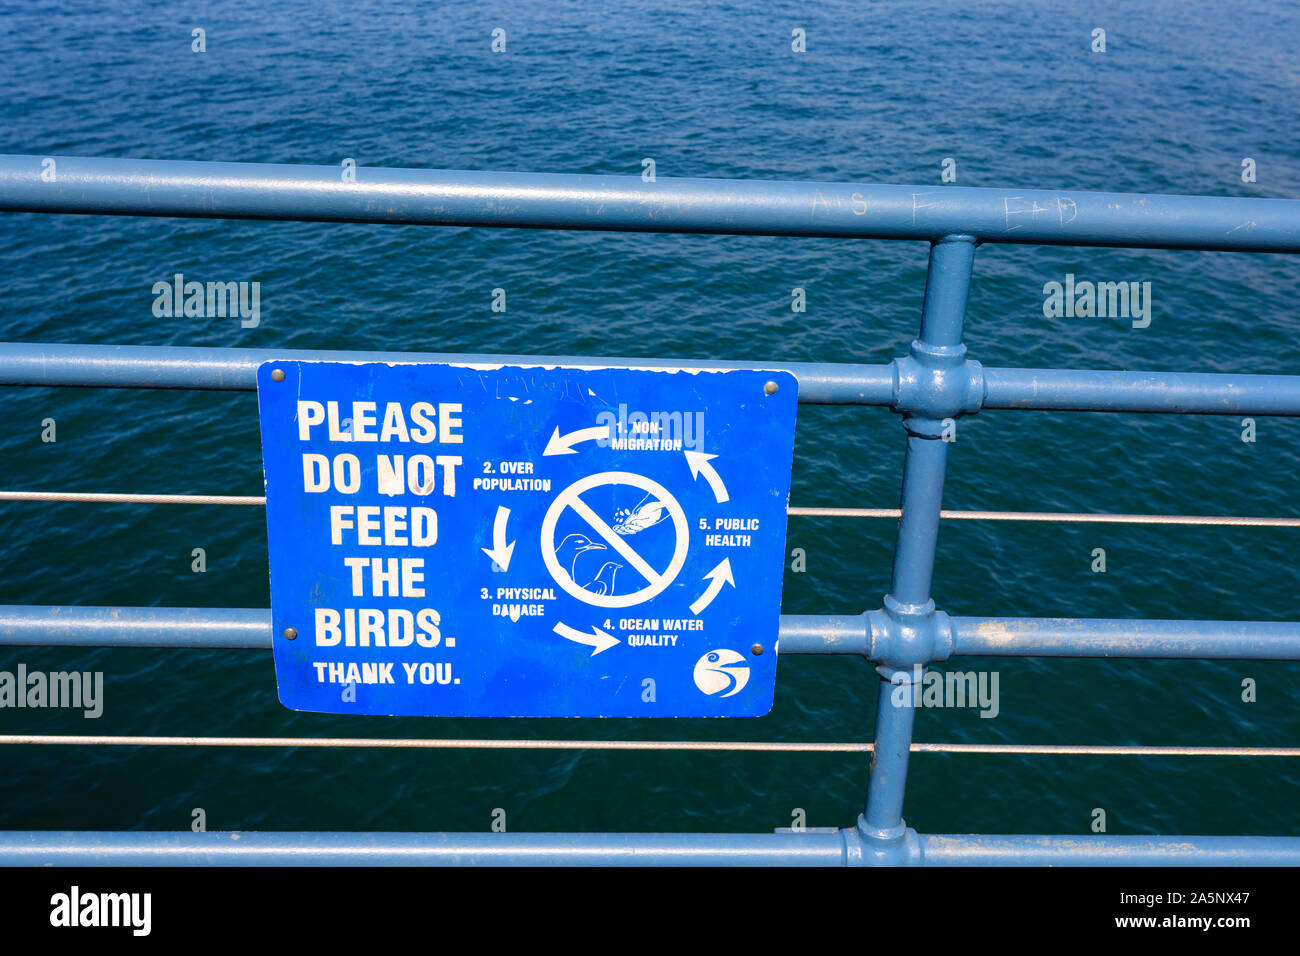 “Do not feed the birds” sign on Santa Monica pier, Los Angeles, California, United States of America. USA. October 2019 Stock Photo